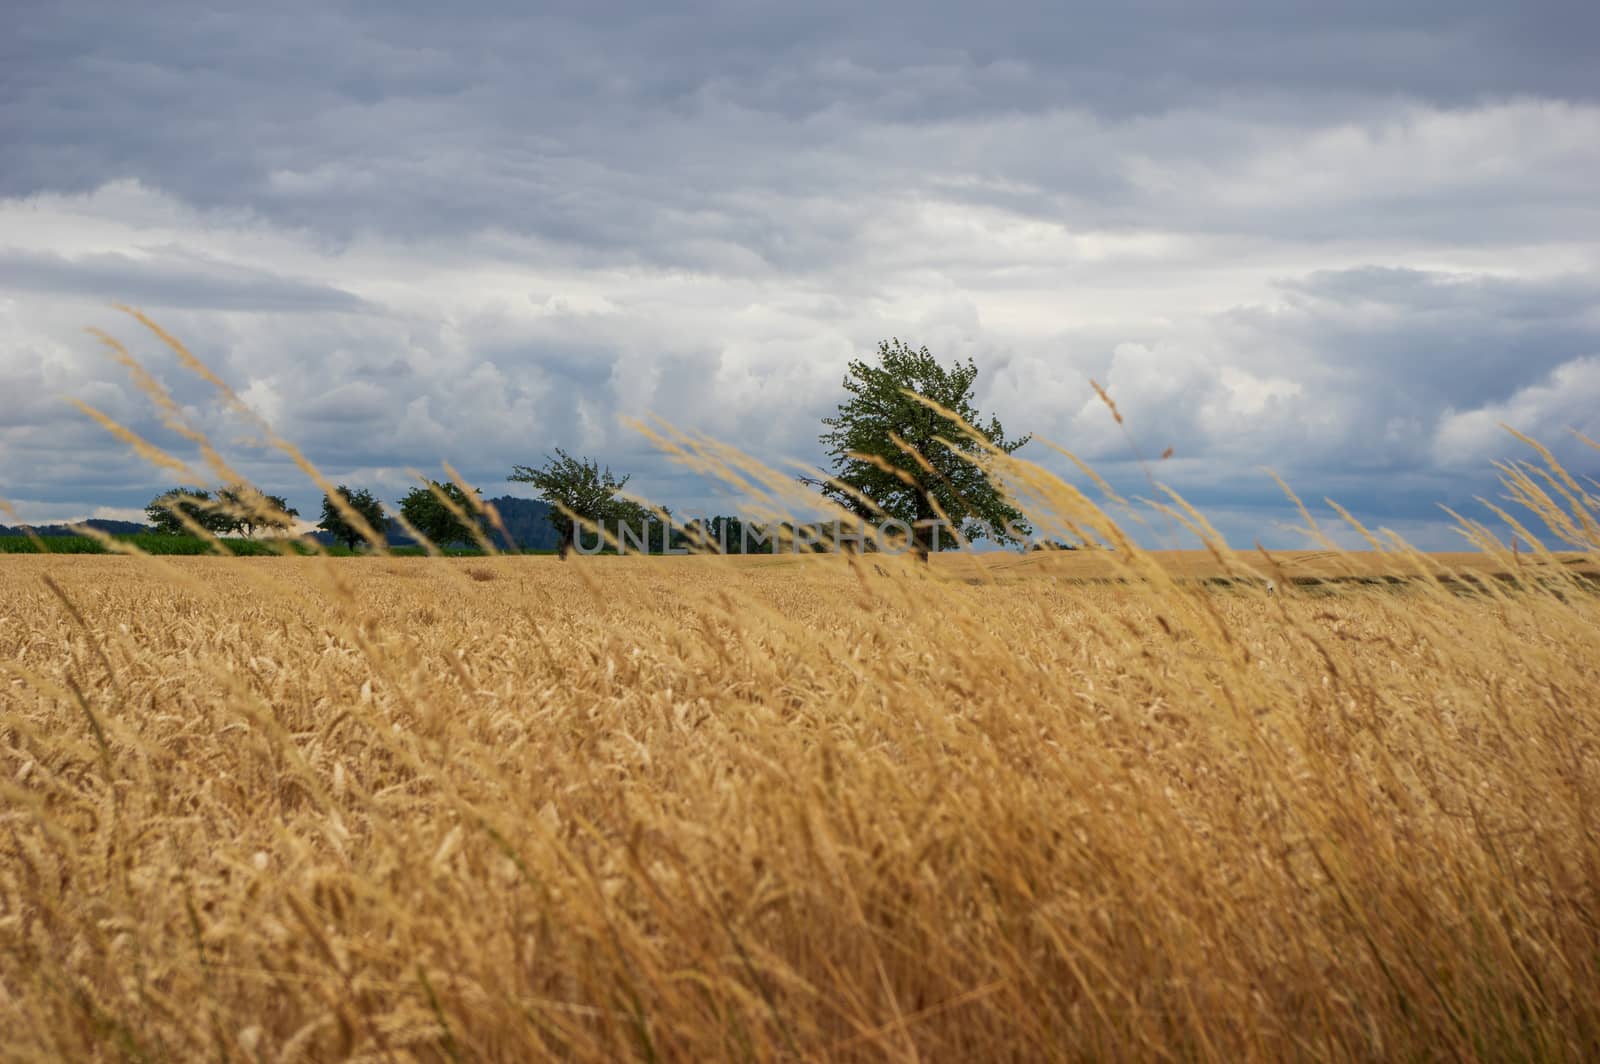 ripe wheat field in front of dramatic sky with storm clouds